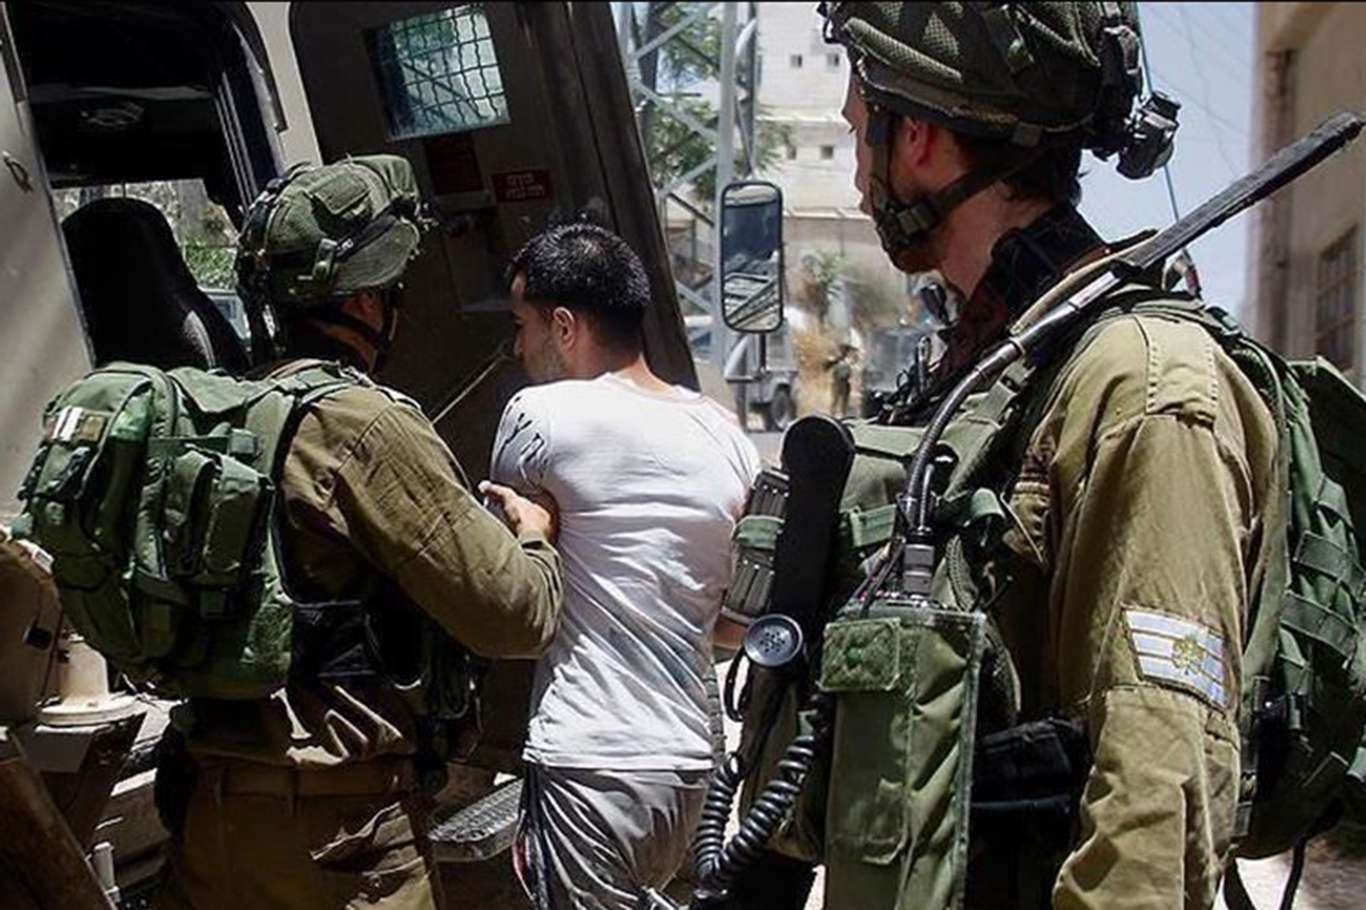 ZOF kidnaps Palestinian citizens during raids in West Bank and Jerusalem